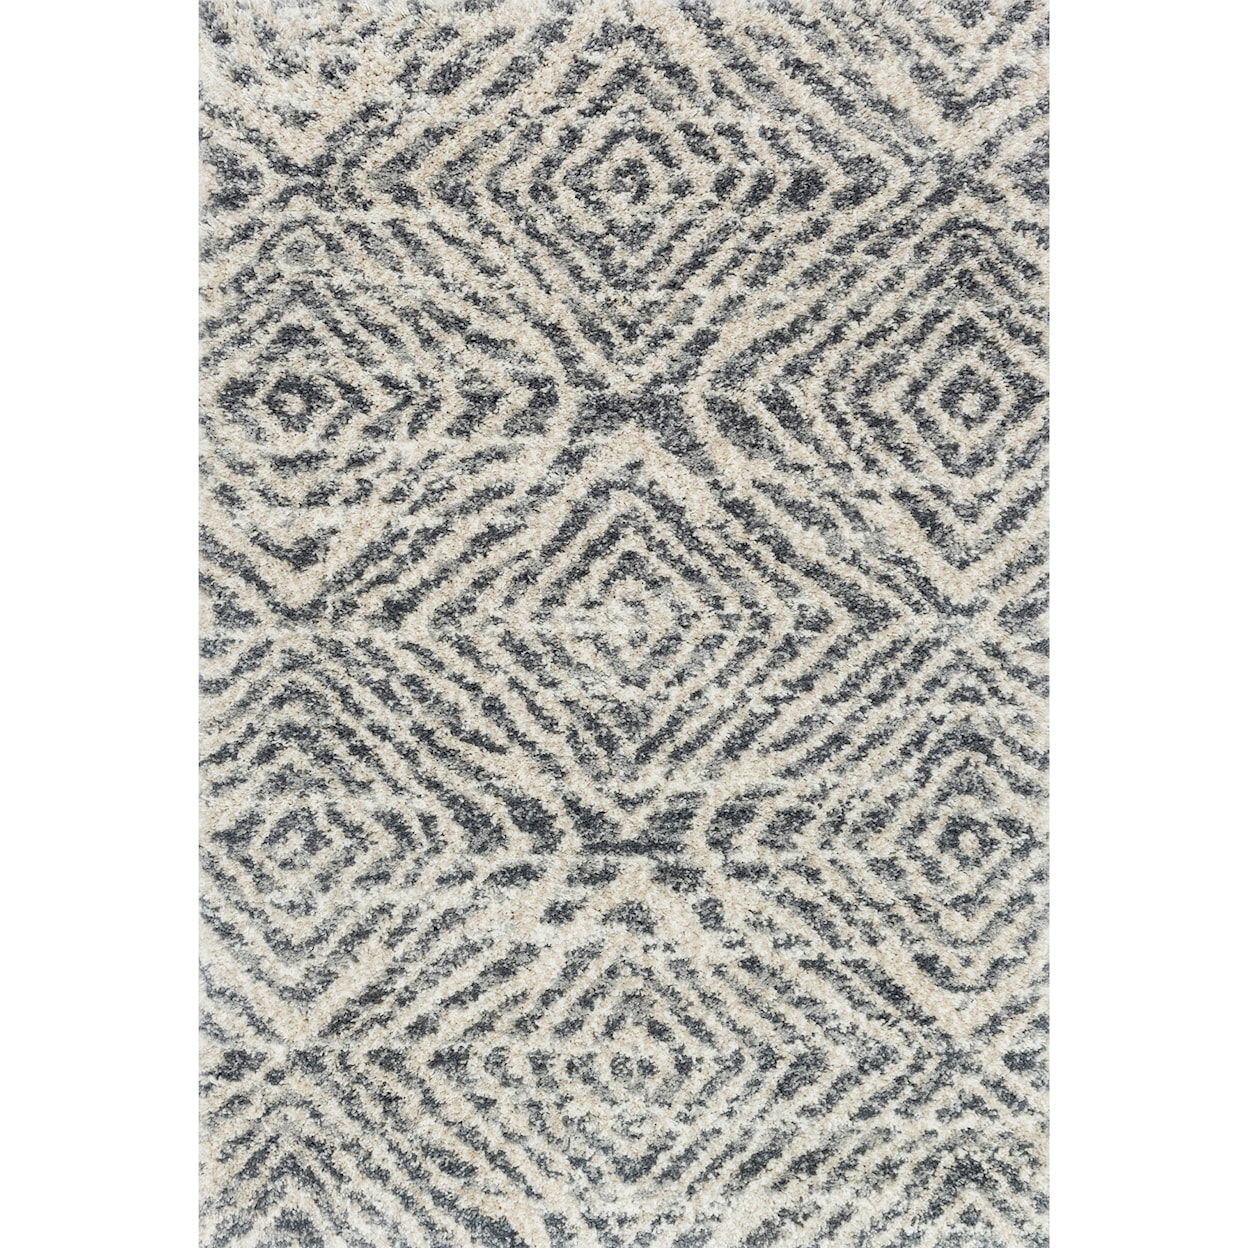 Reeds Rugs Quincy 5'3" x 7'6" Graphite / Sand Rug